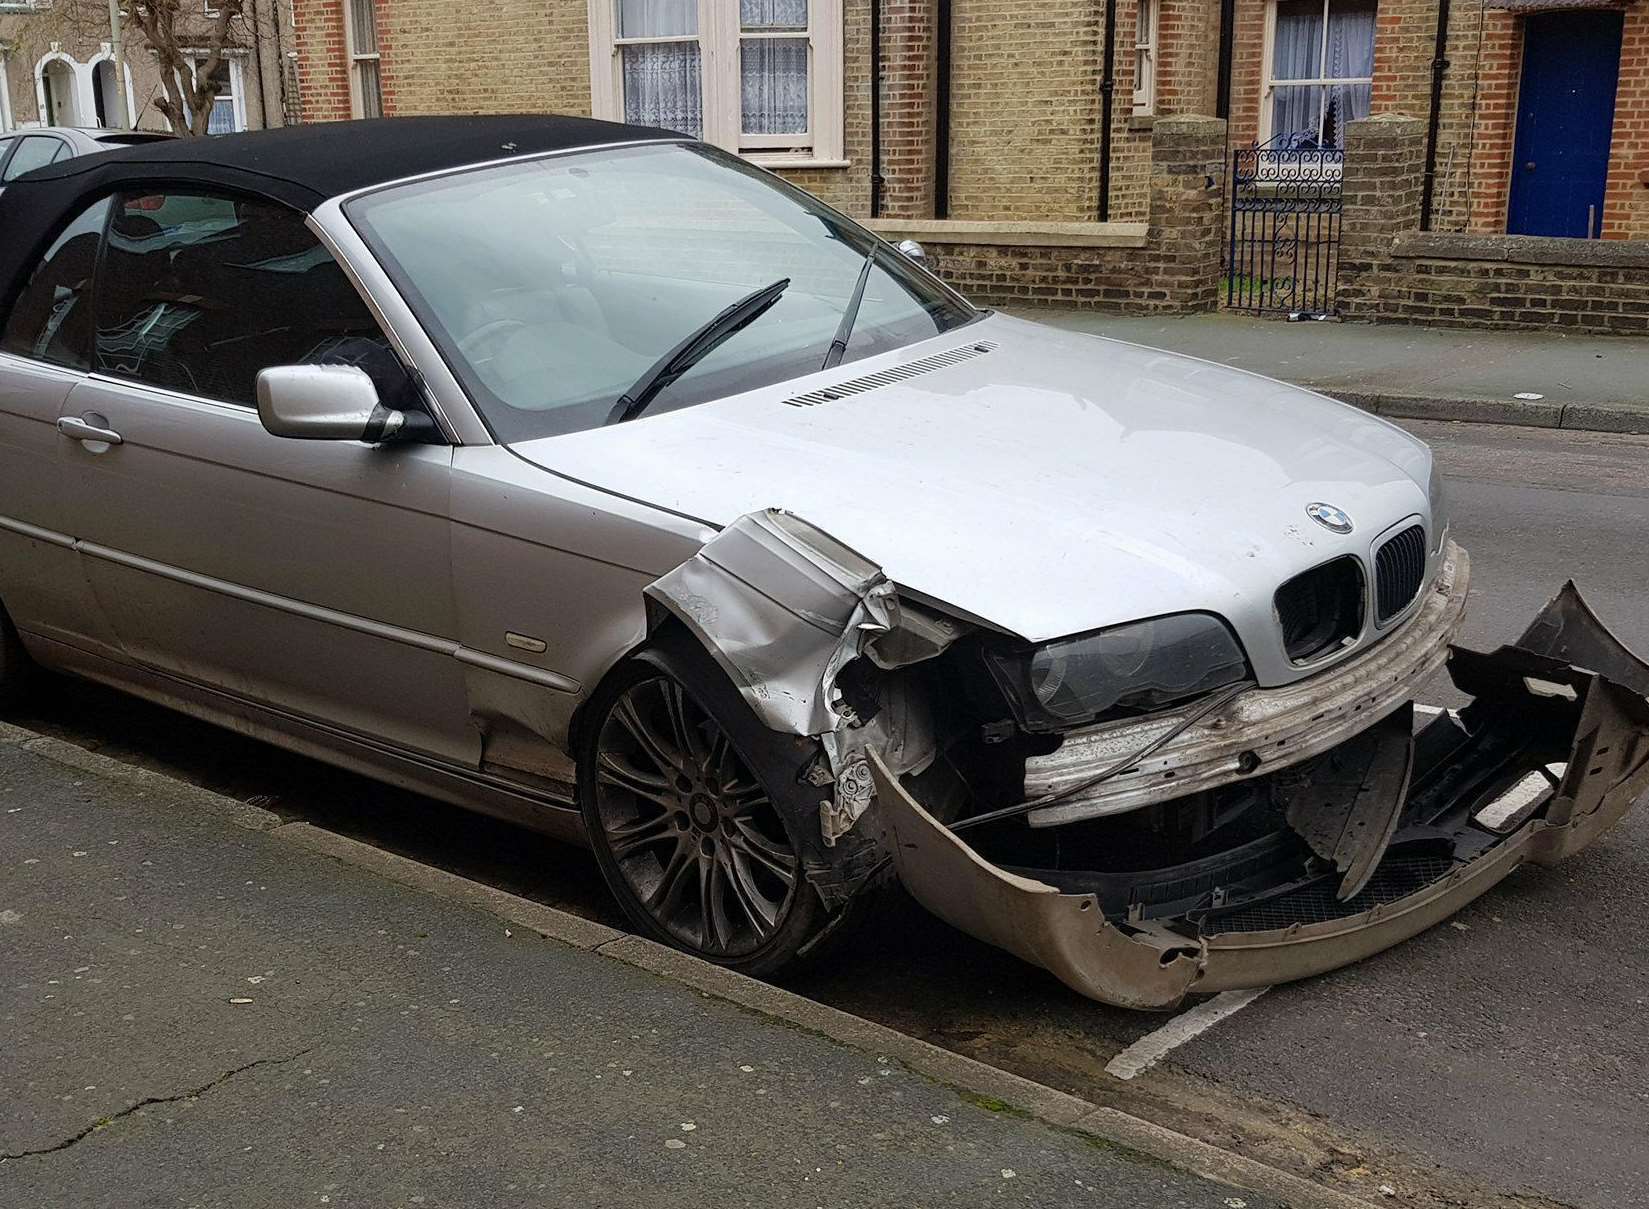 The silver BMW was found in Cavendish Road